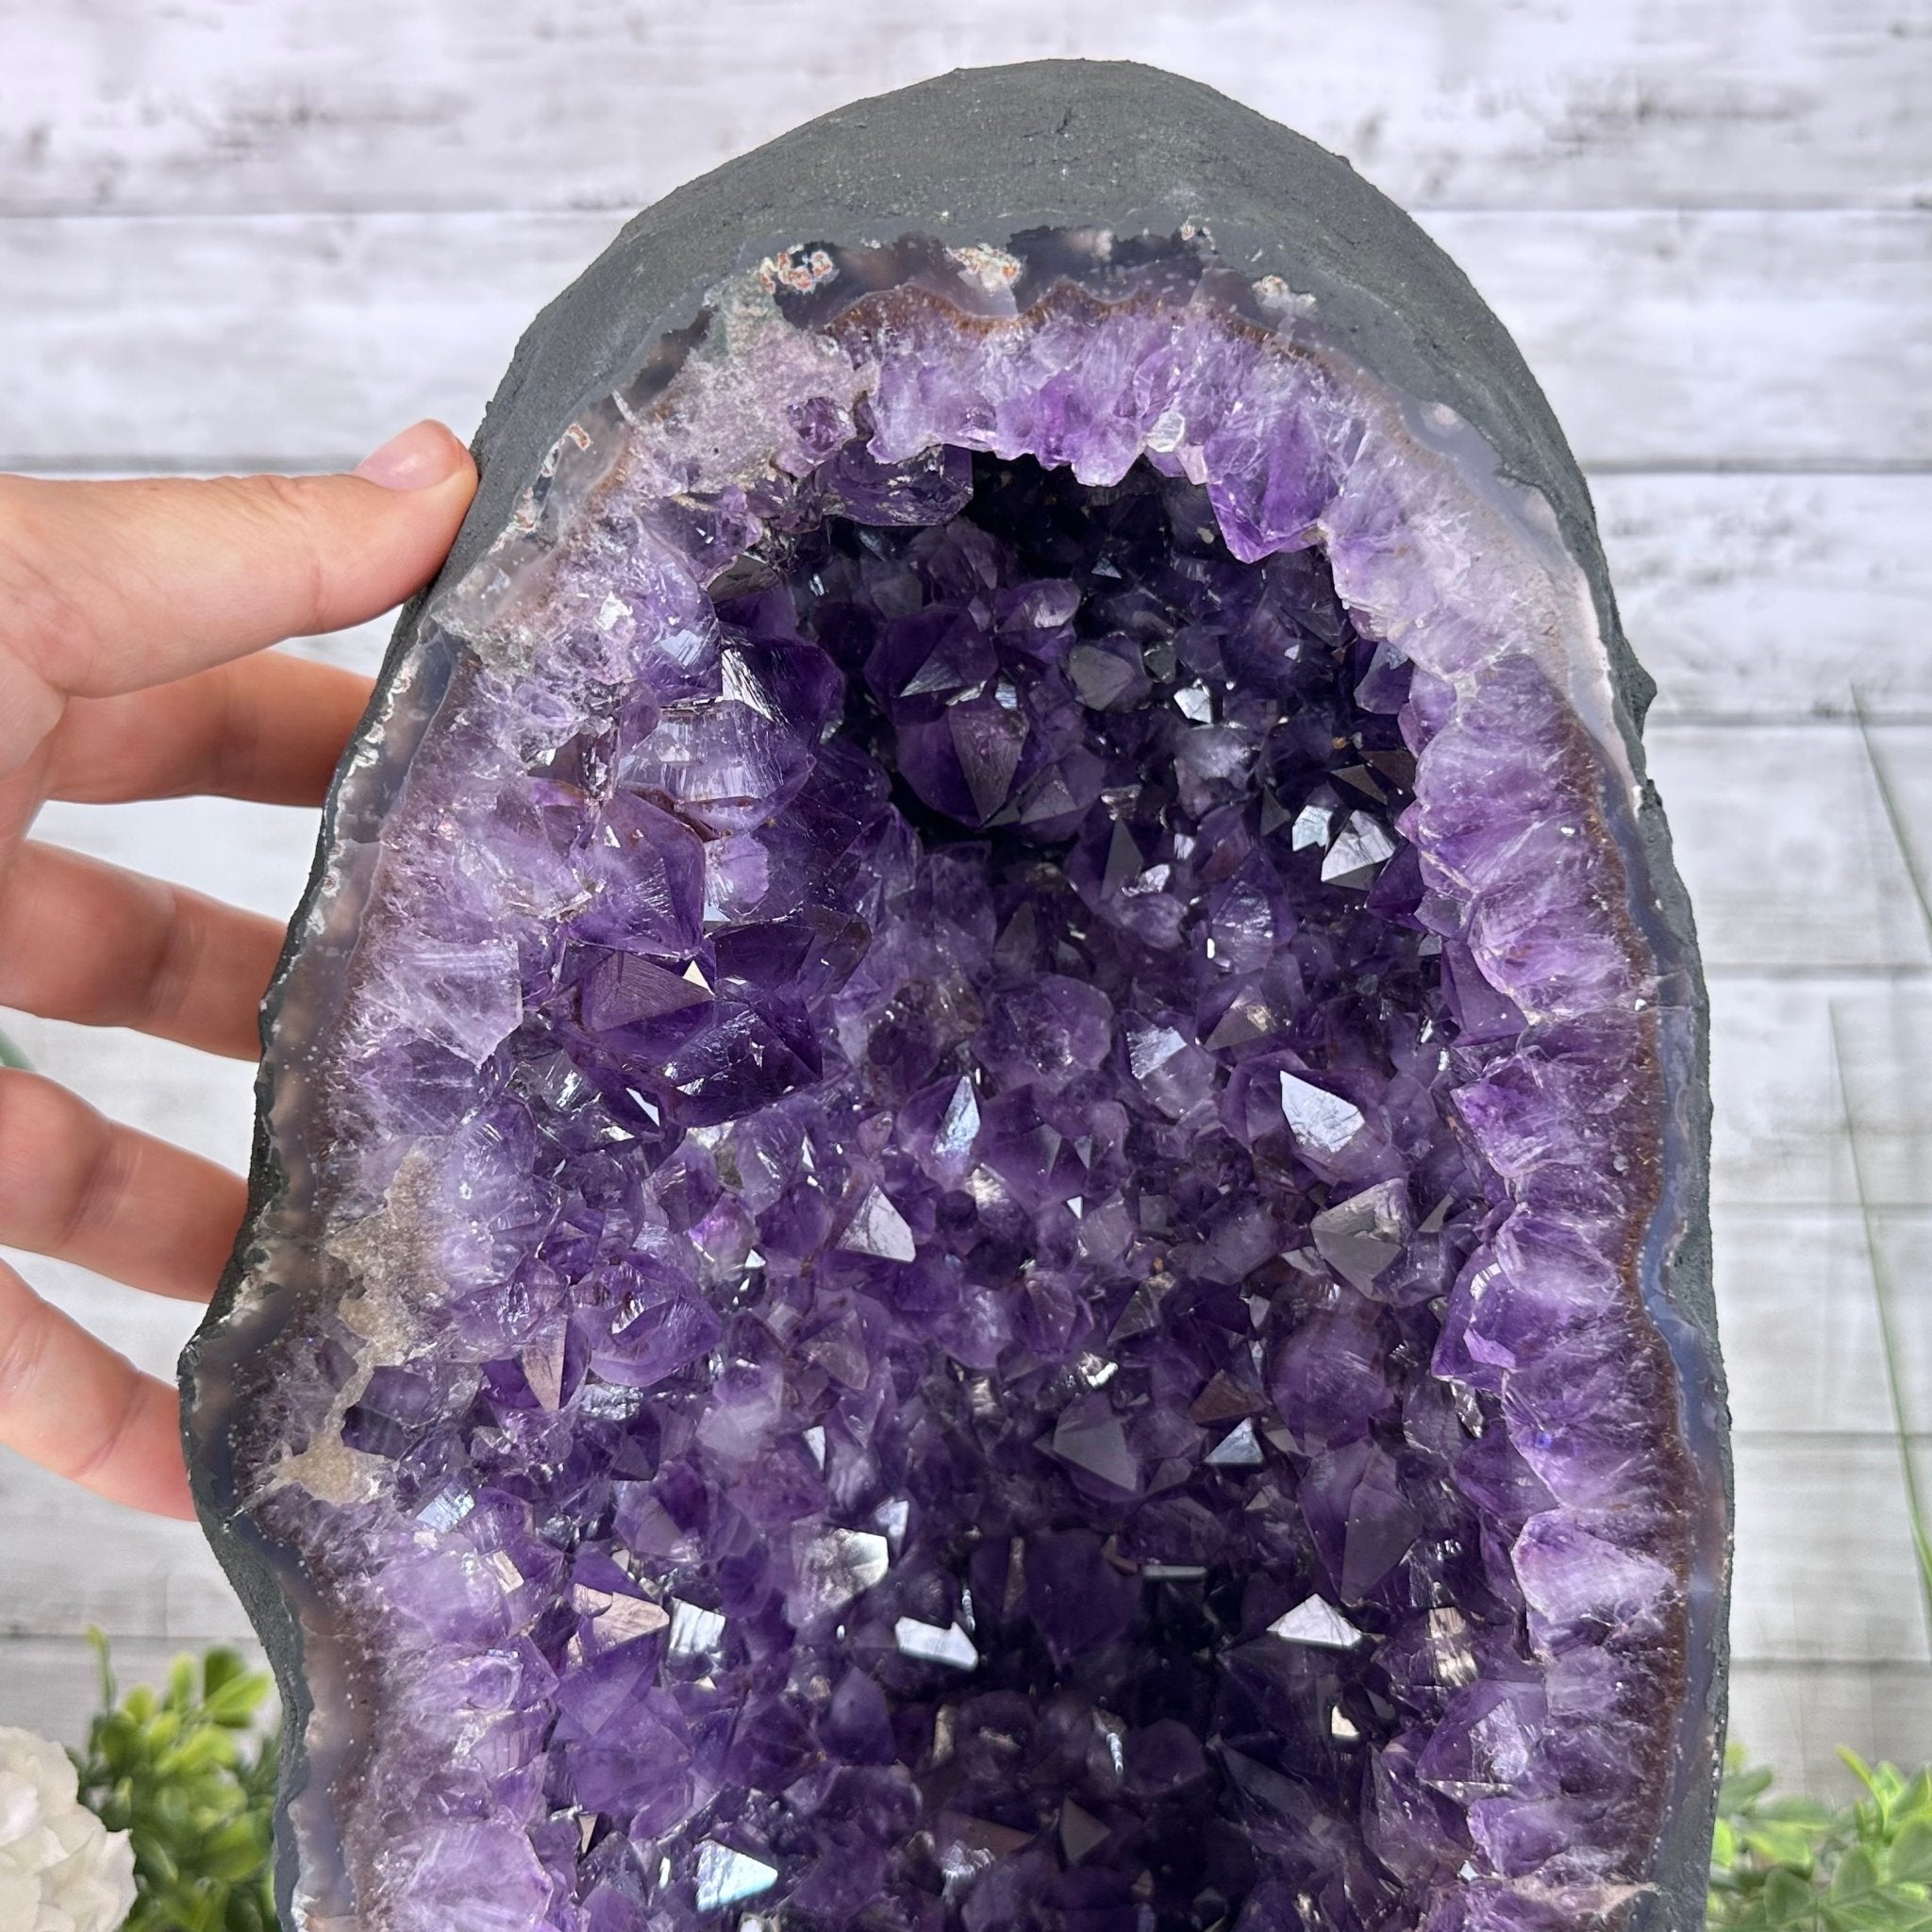 Extra Plus Quality Brazilian Amethyst Cathedral, 30 lbs & 13.75" Tall, Model #5601-0871 by Brazil Gems - Brazil GemsBrazil GemsExtra Plus Quality Brazilian Amethyst Cathedral, 30 lbs & 13.75" Tall, Model #5601-0871 by Brazil GemsCathedrals5601-0871